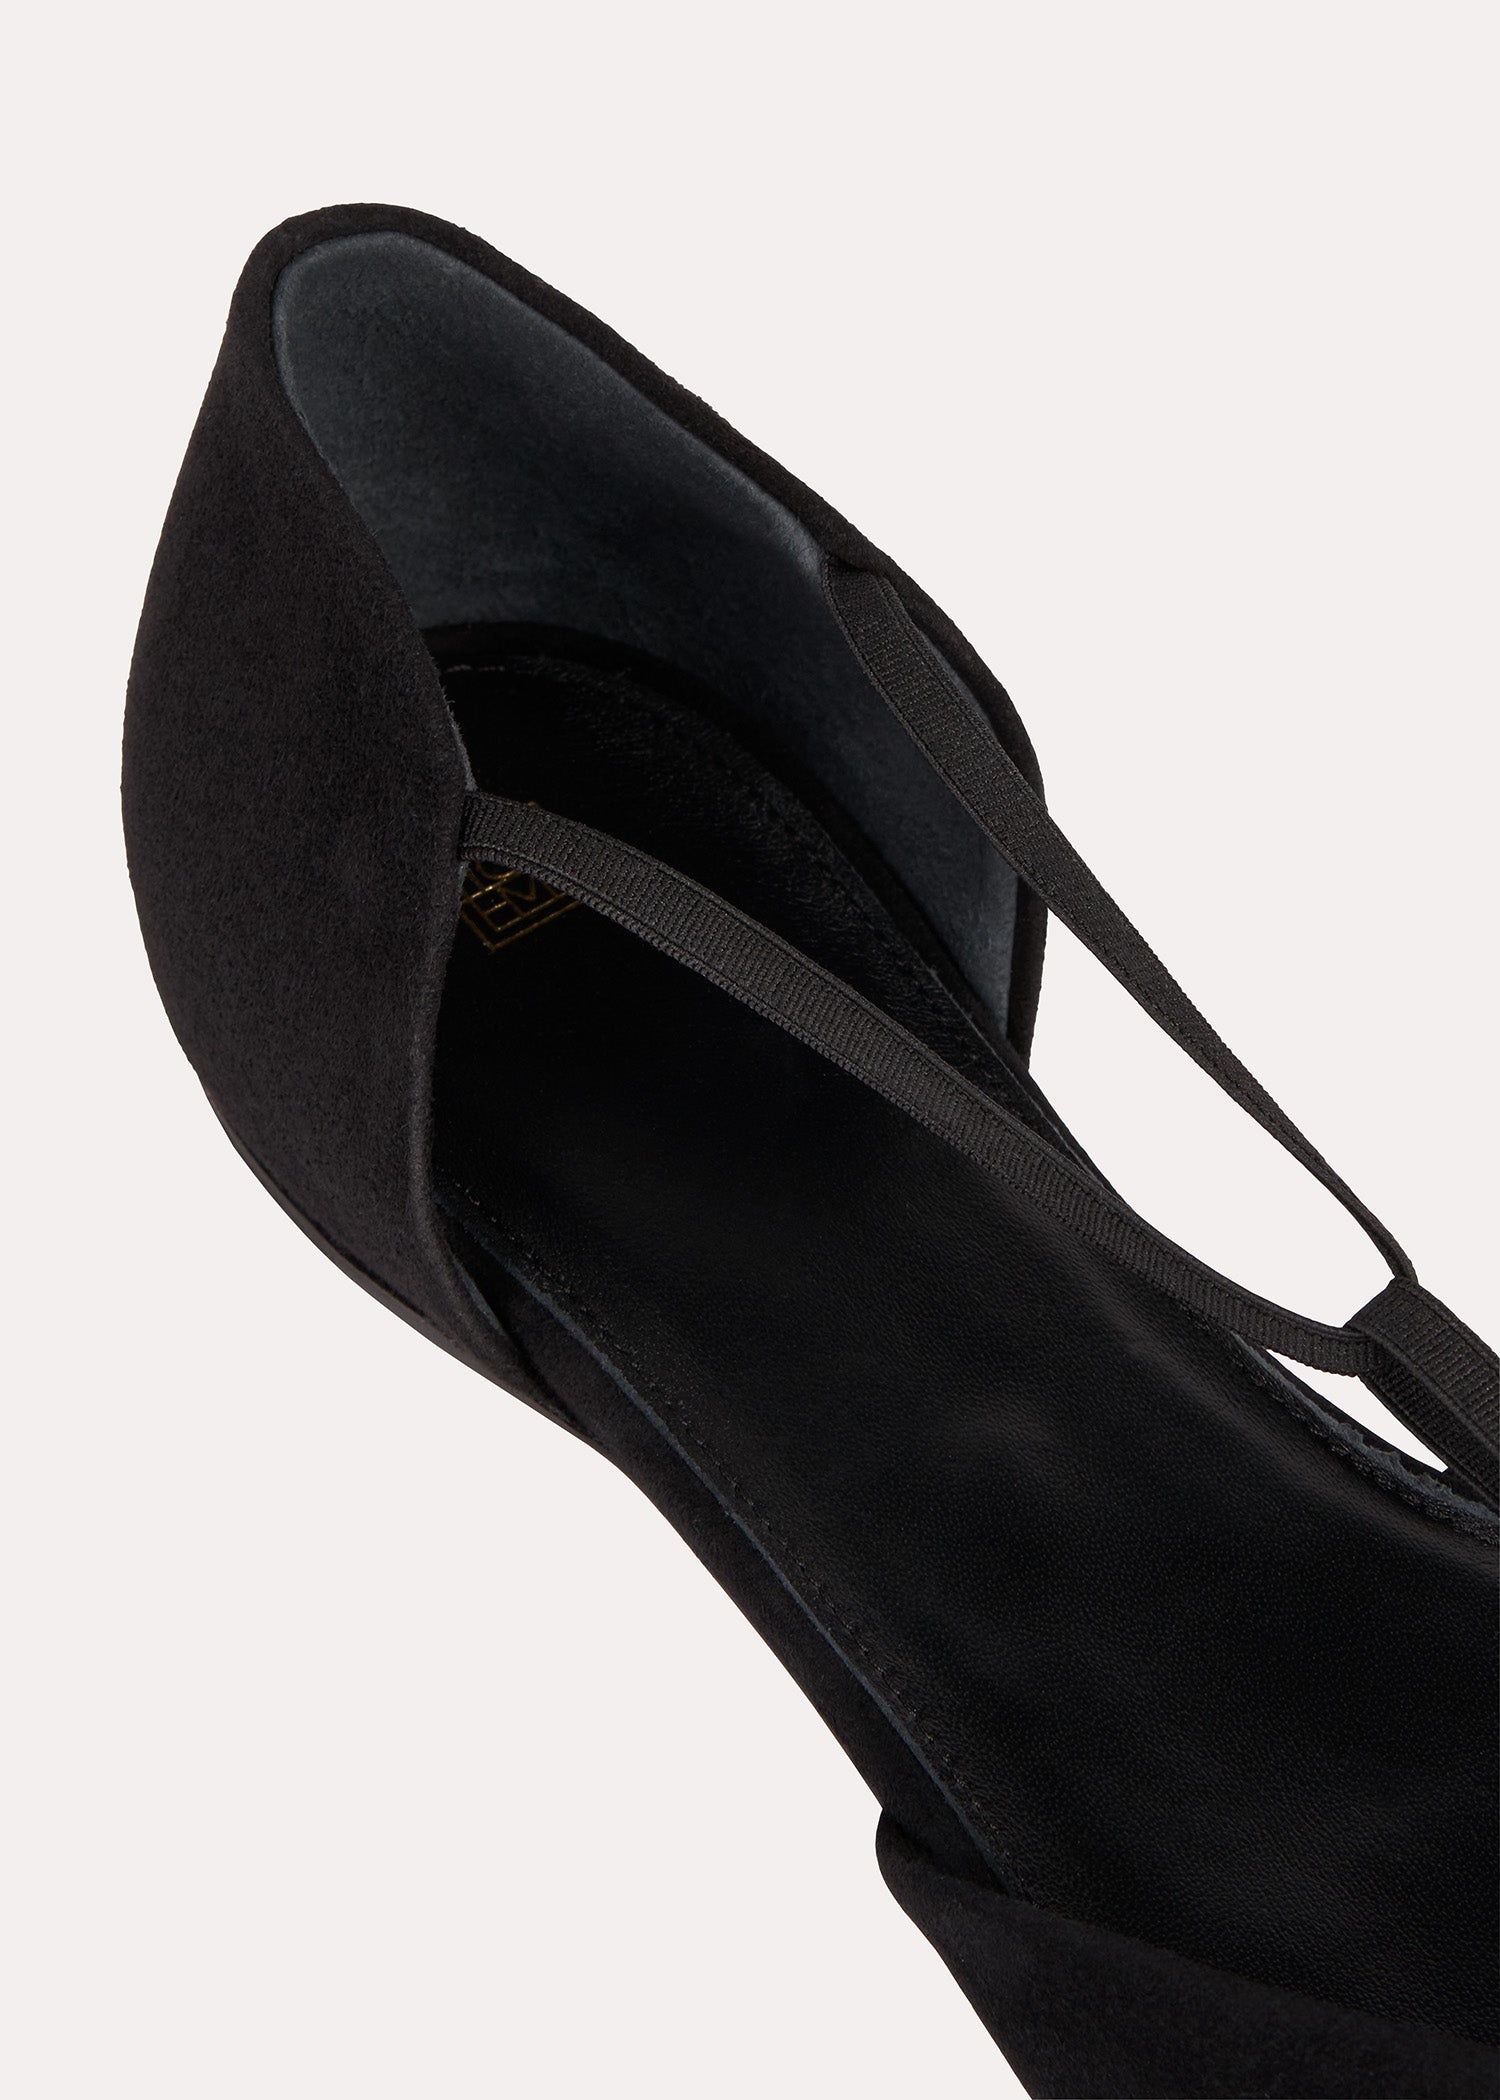 The Suede T-Strap Flat black - 6